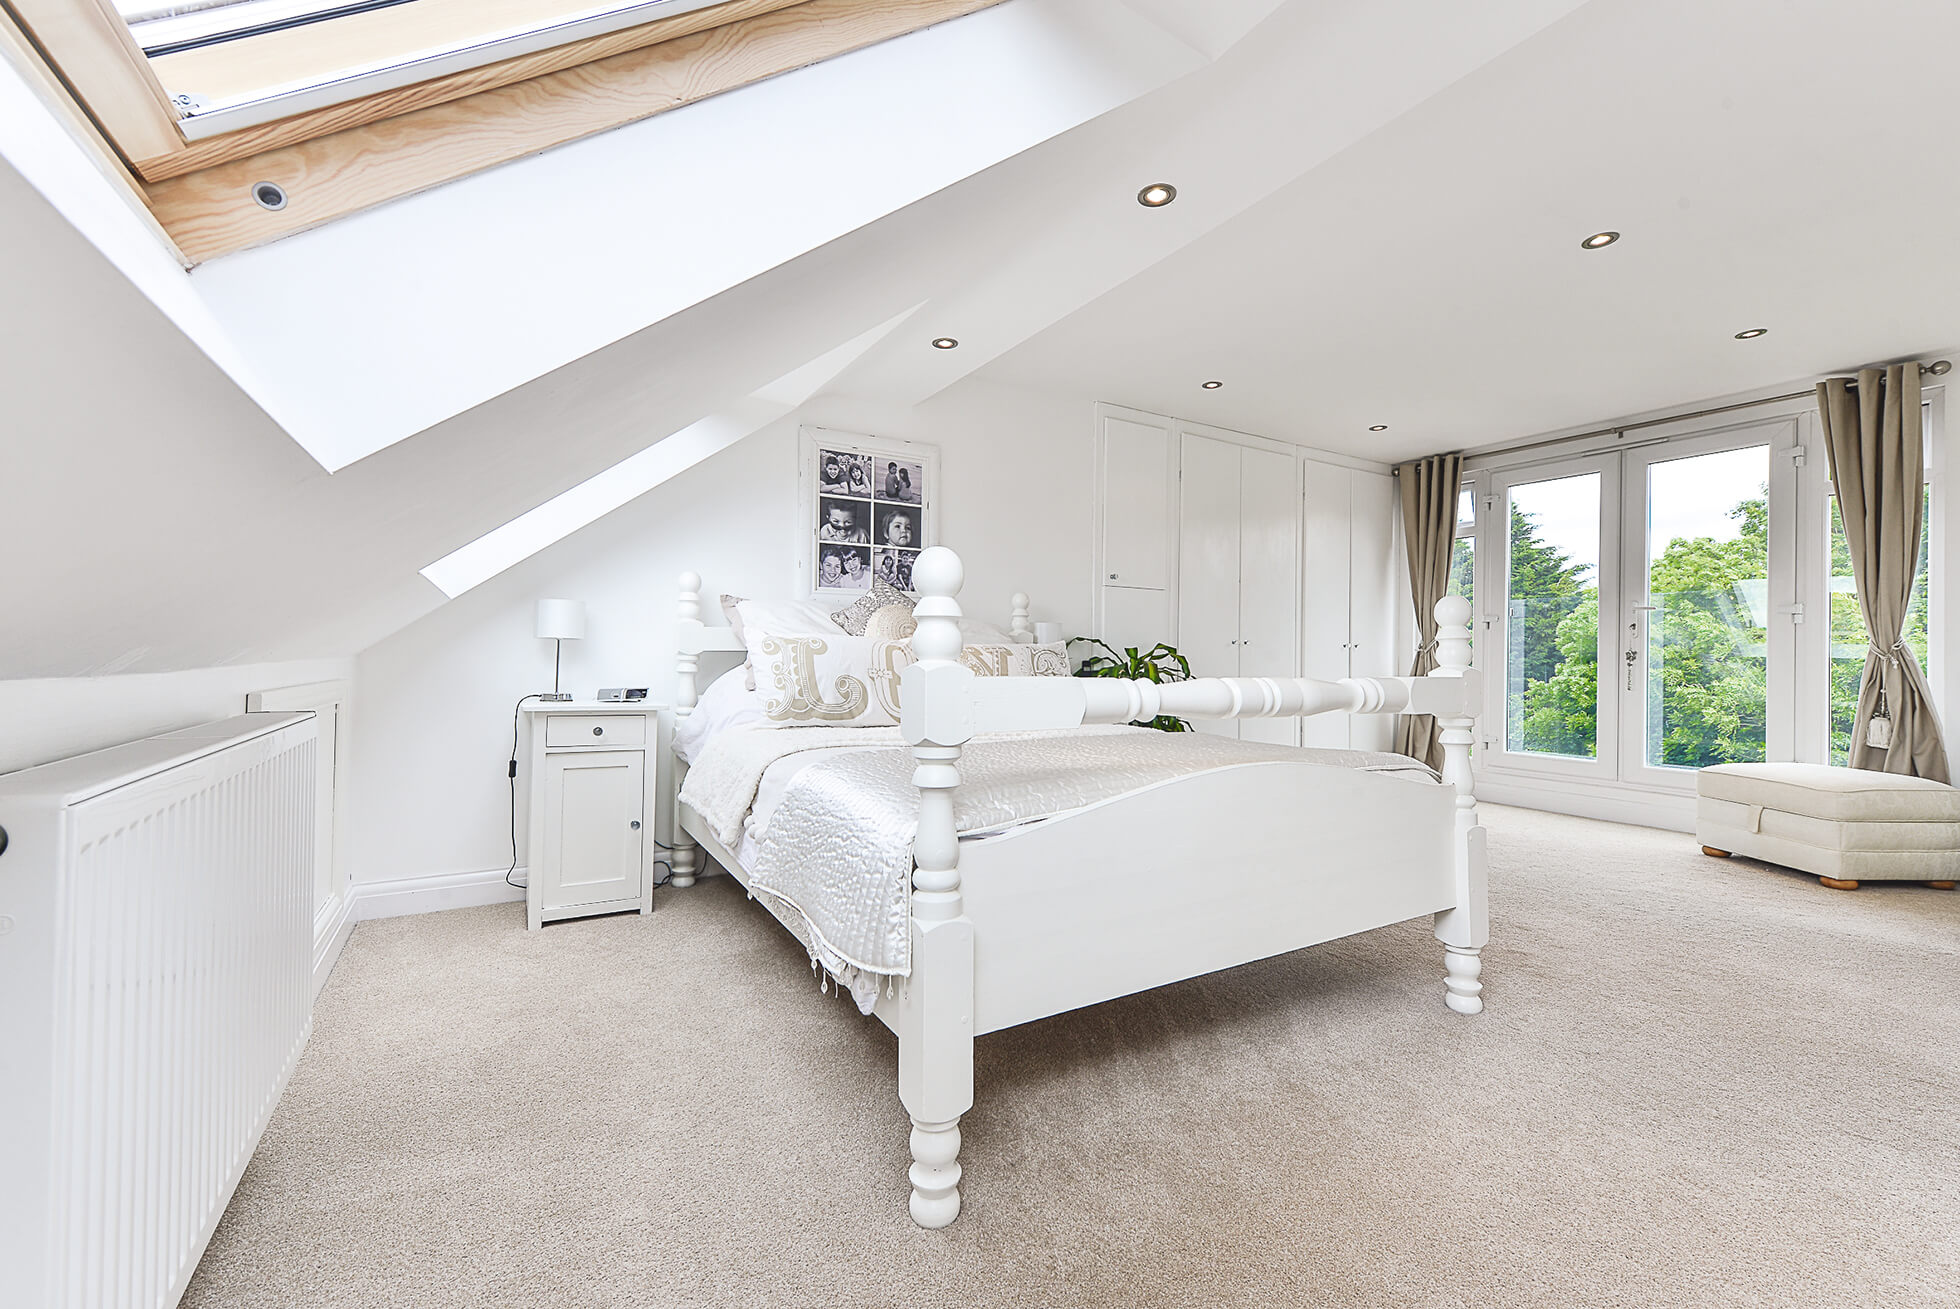 Do you have a question about converting your Loft in Widford? Here are the most popular questions asked by our clients.